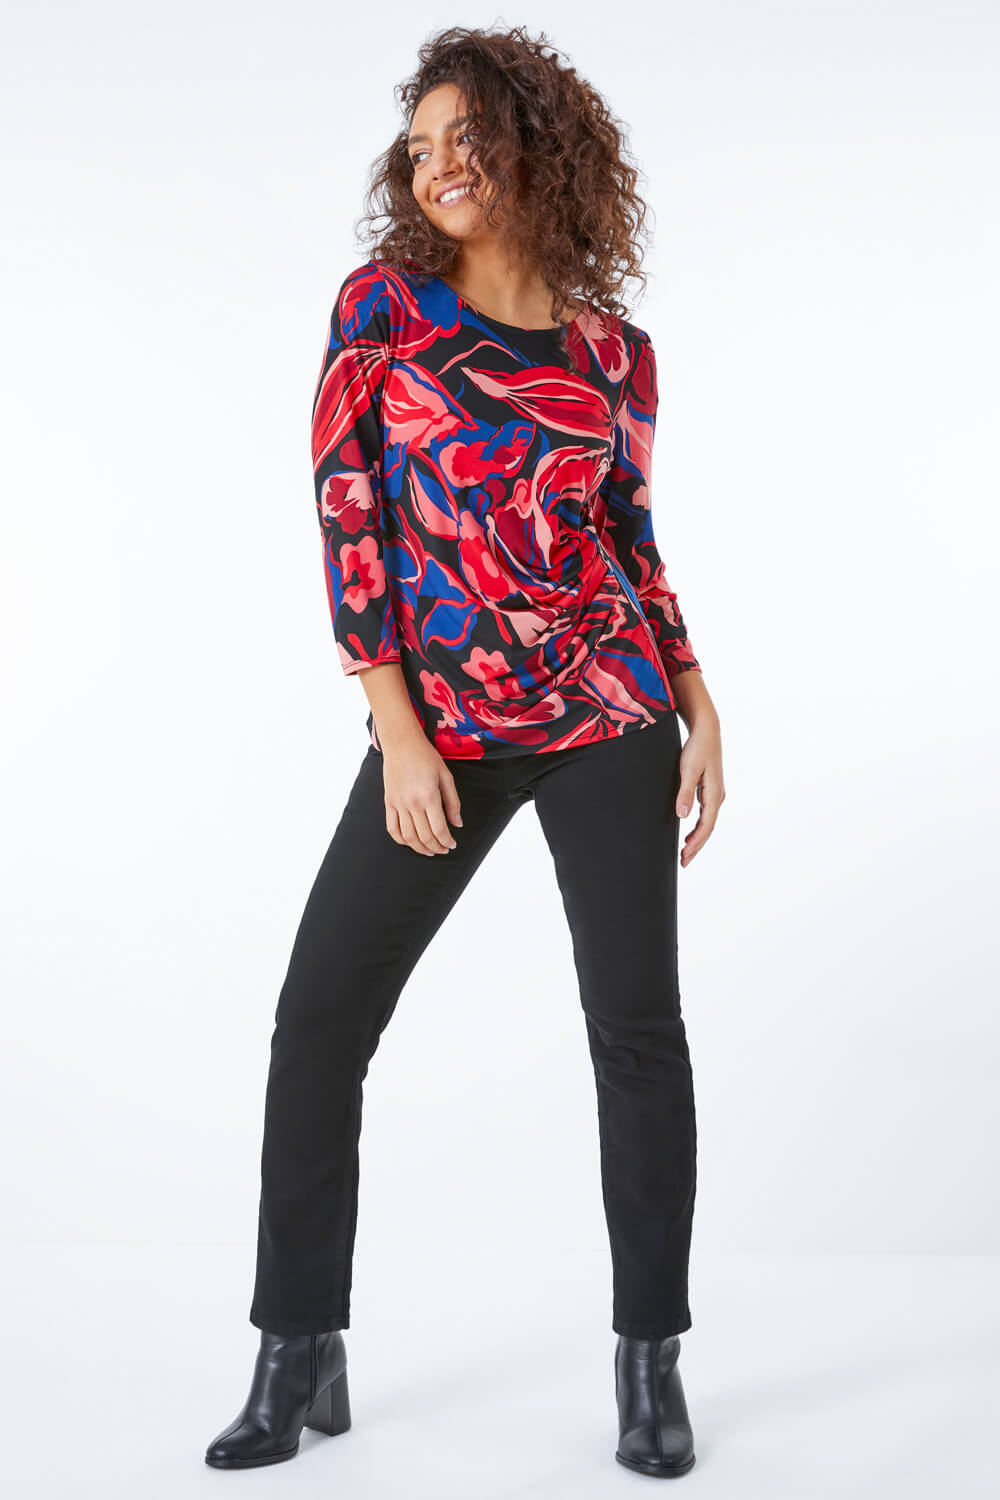 CORAL Petite Abstract Floral Ruched Top, Image 4 of 5